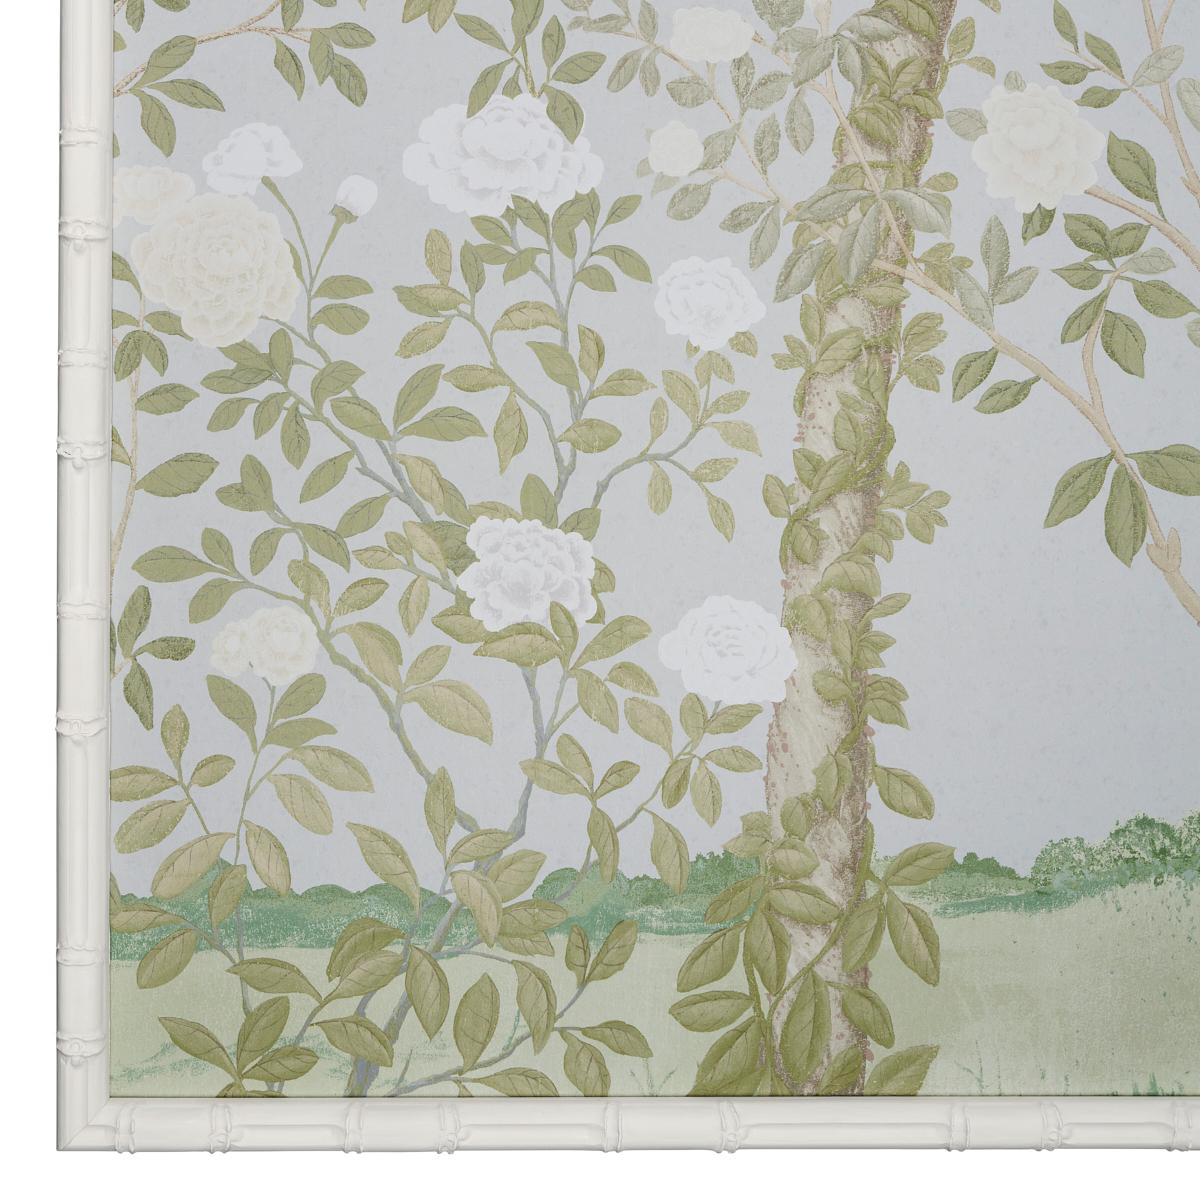 Our wallpaper panels are gorgeous enough to frame—and we’ve done all the work for you. Resized to capture the most alluring portions of the original design by Miles Redd, this art panel pairs the formality of an English garden with the soft romance